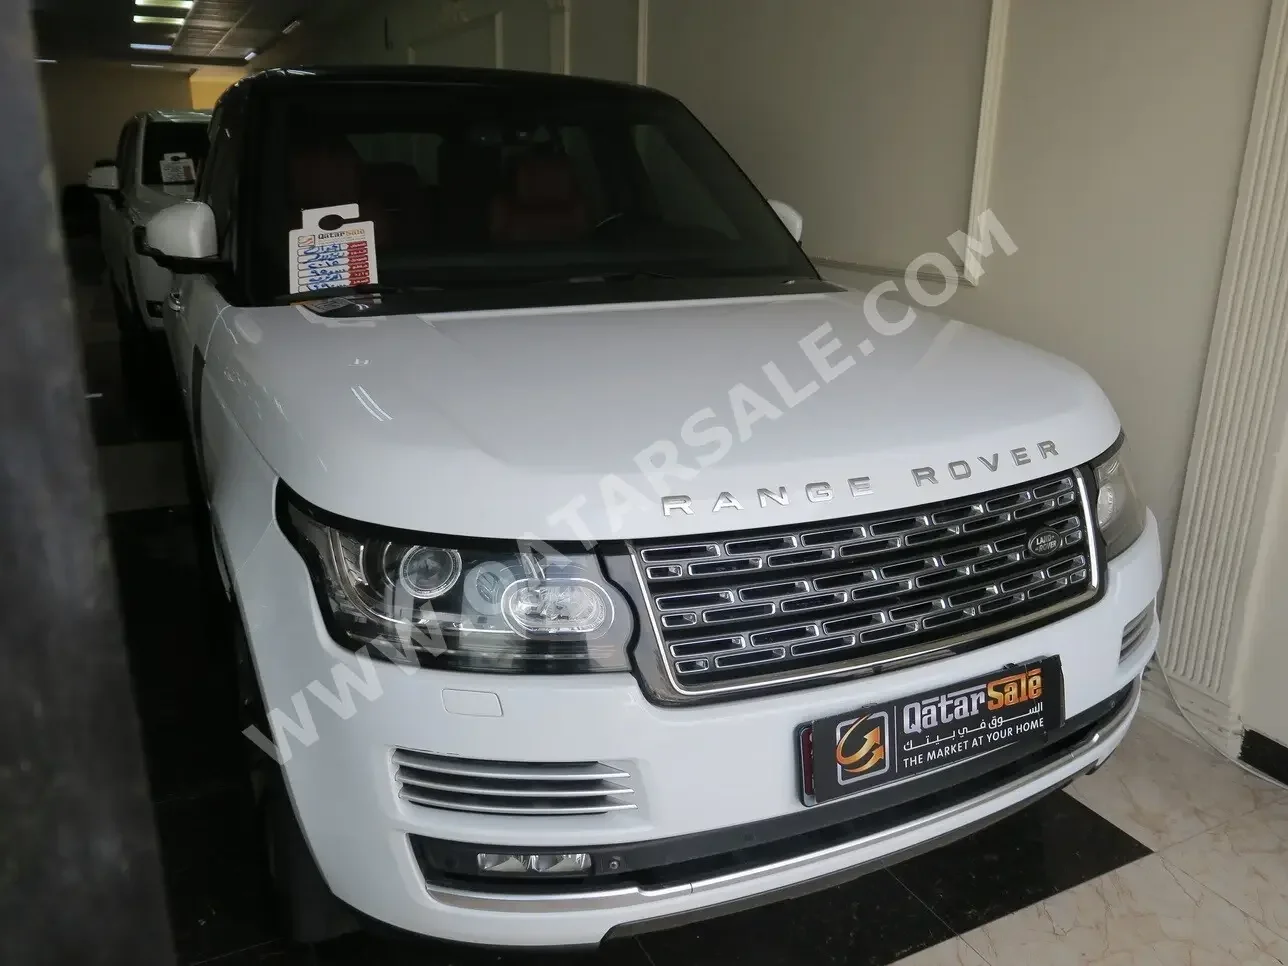 Land Rover  Range Rover  Vogue  Autobiography  2015  Automatic  95,000 Km  8 Cylinder  Four Wheel Drive (4WD)  SUV  White